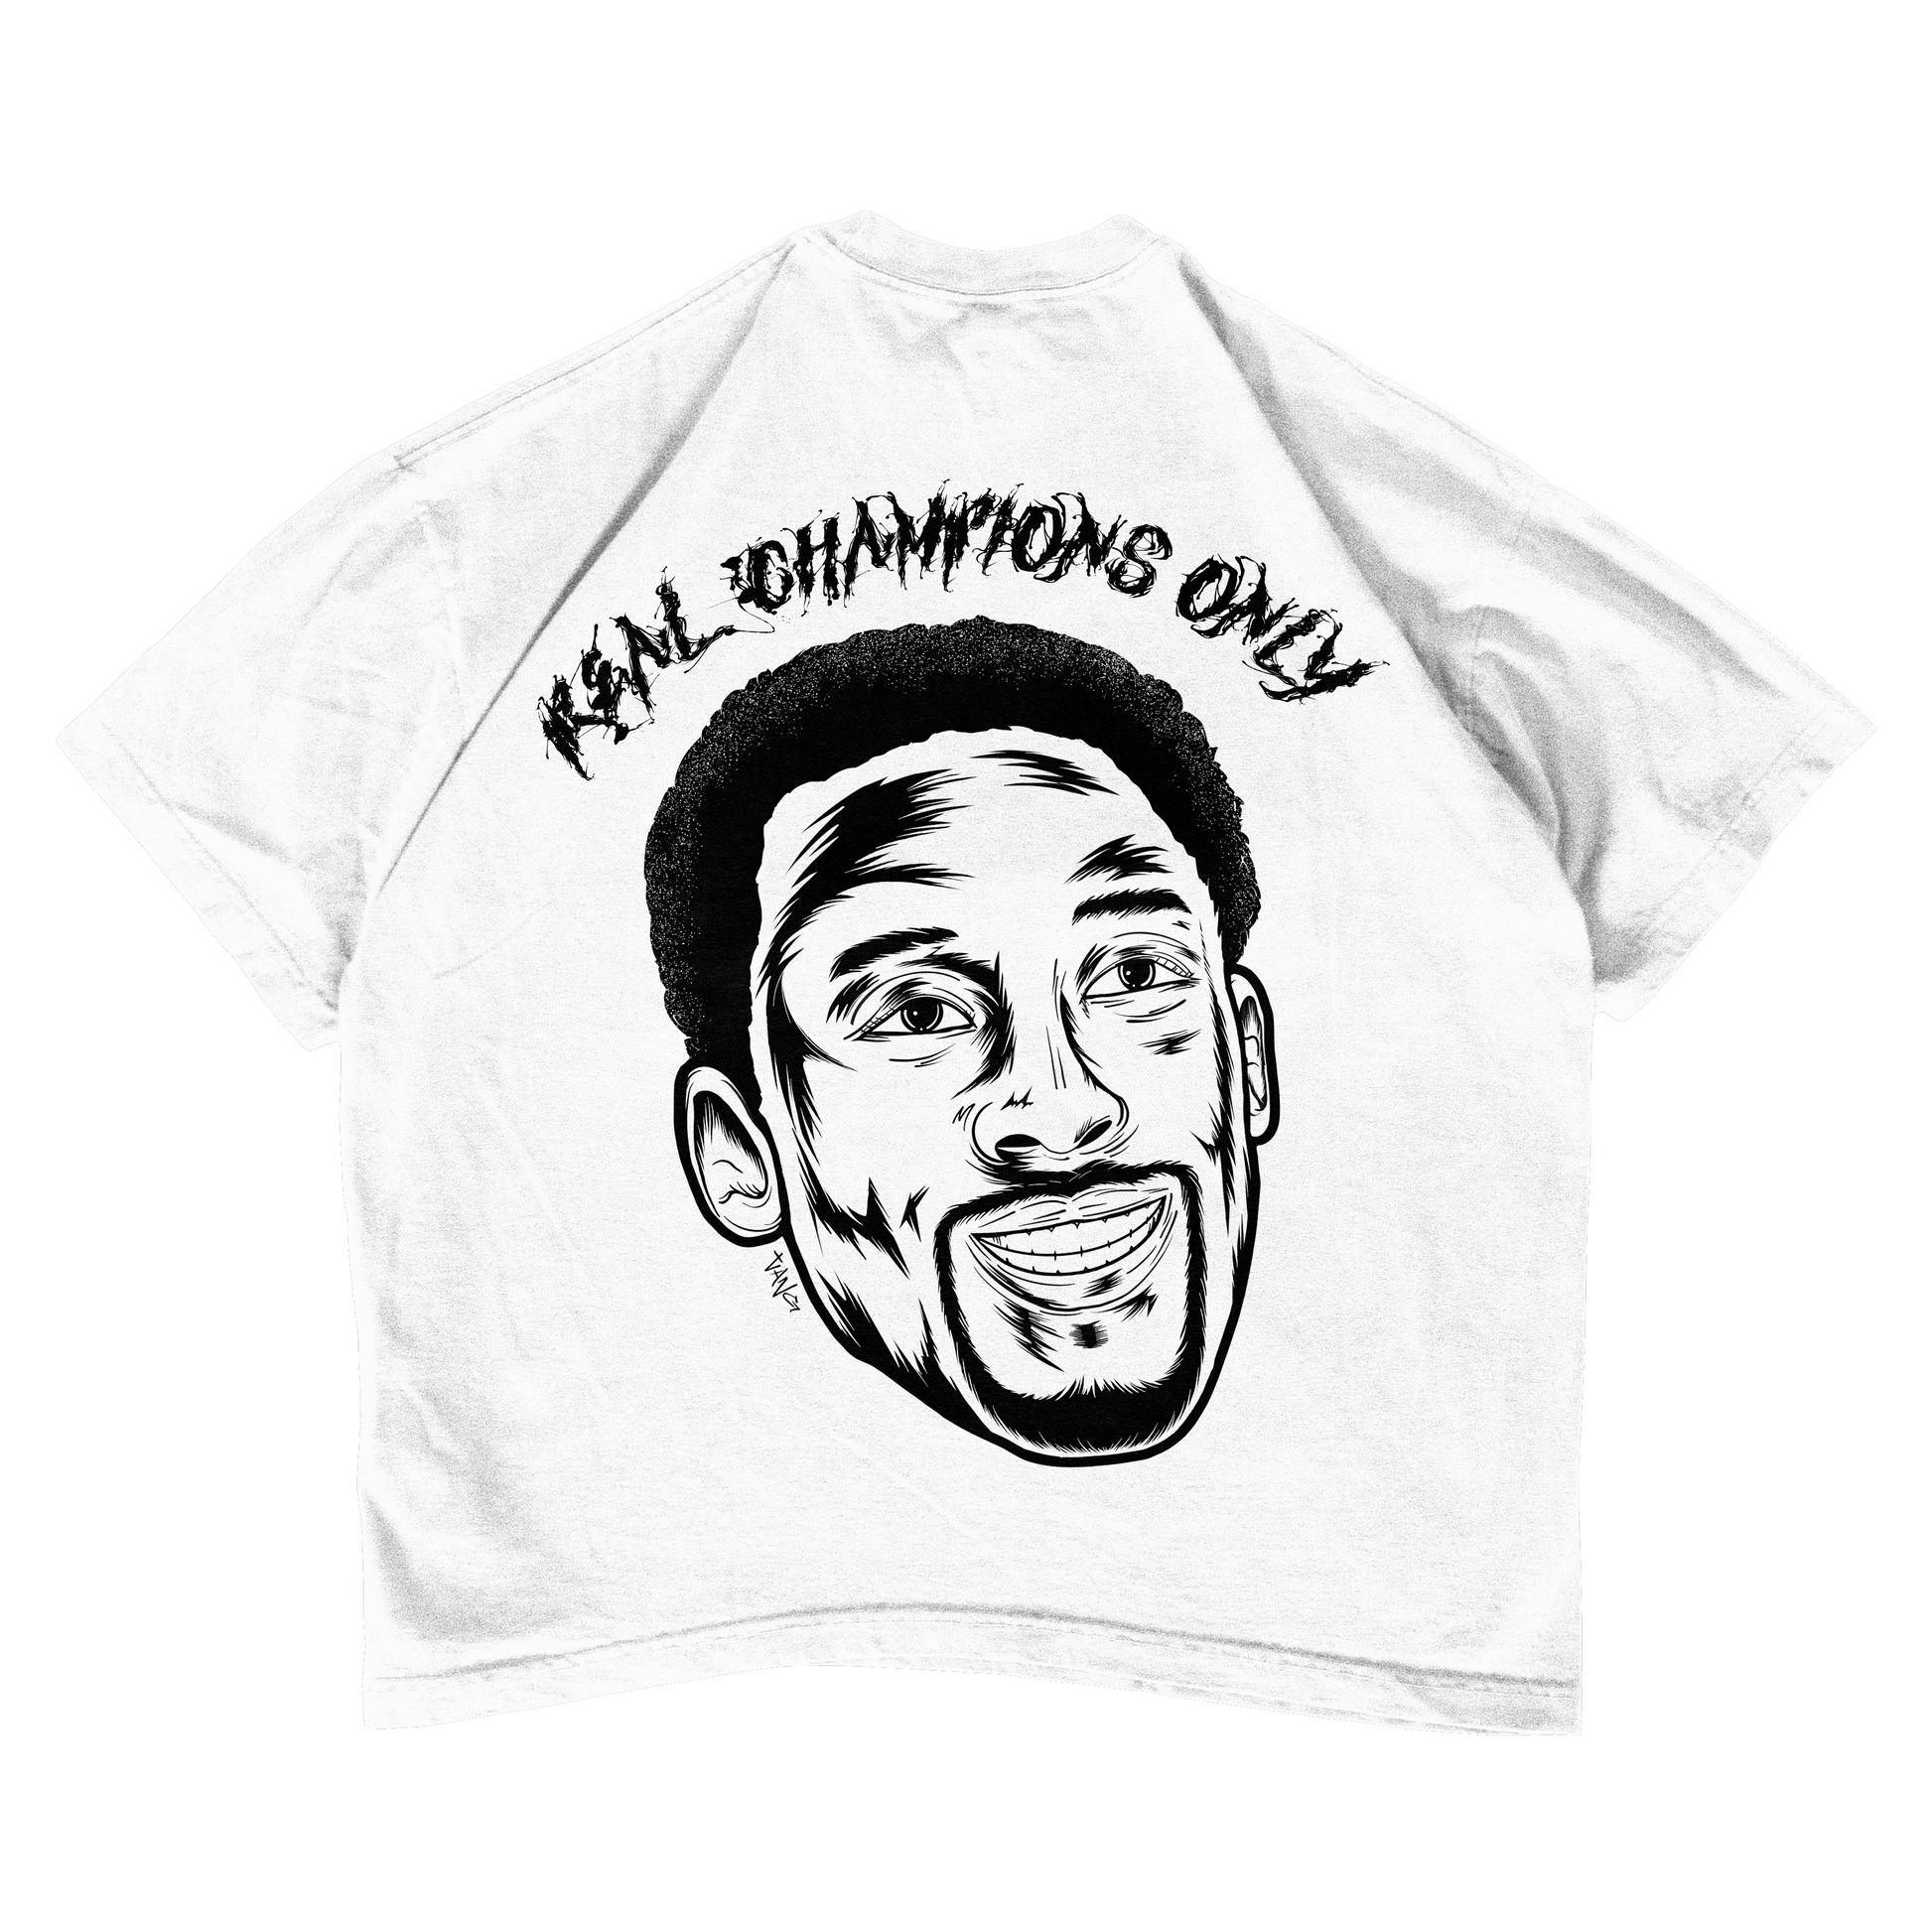 Real Champions Only - Premium LA Edition T-Shirt - TYLER VANG